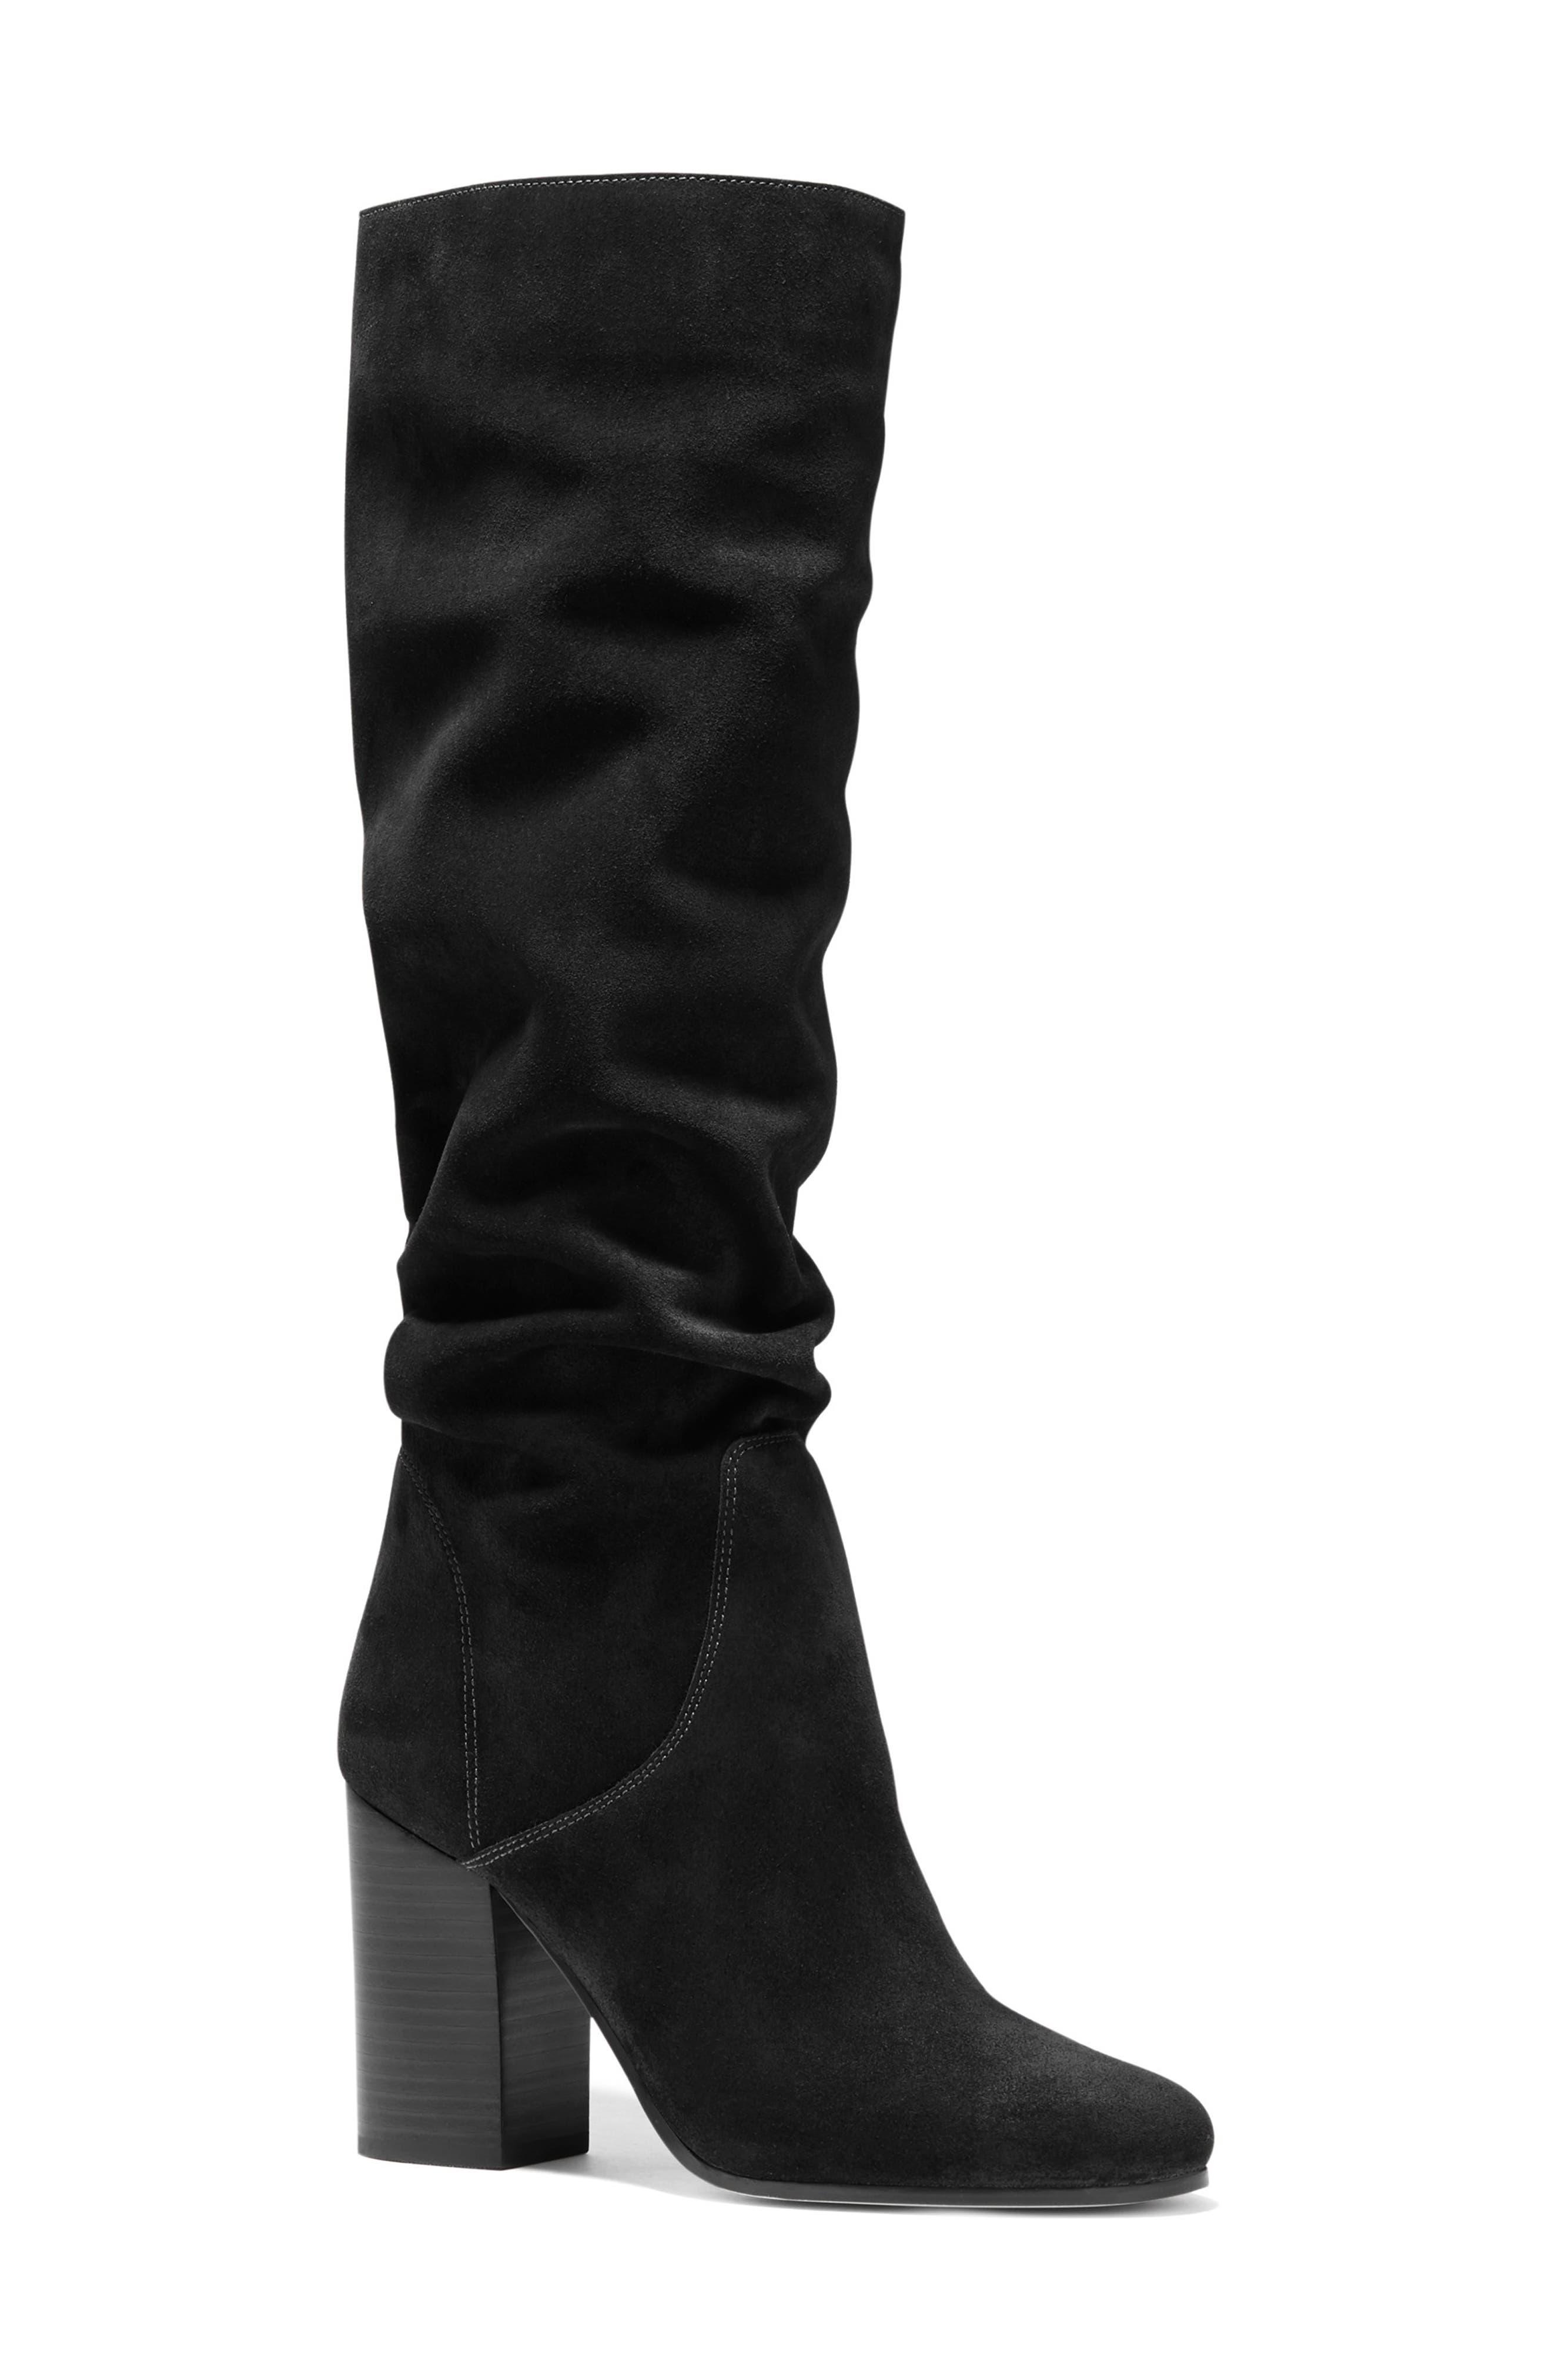 Michael Kors Leigh Suede Boot in Black | Lyst